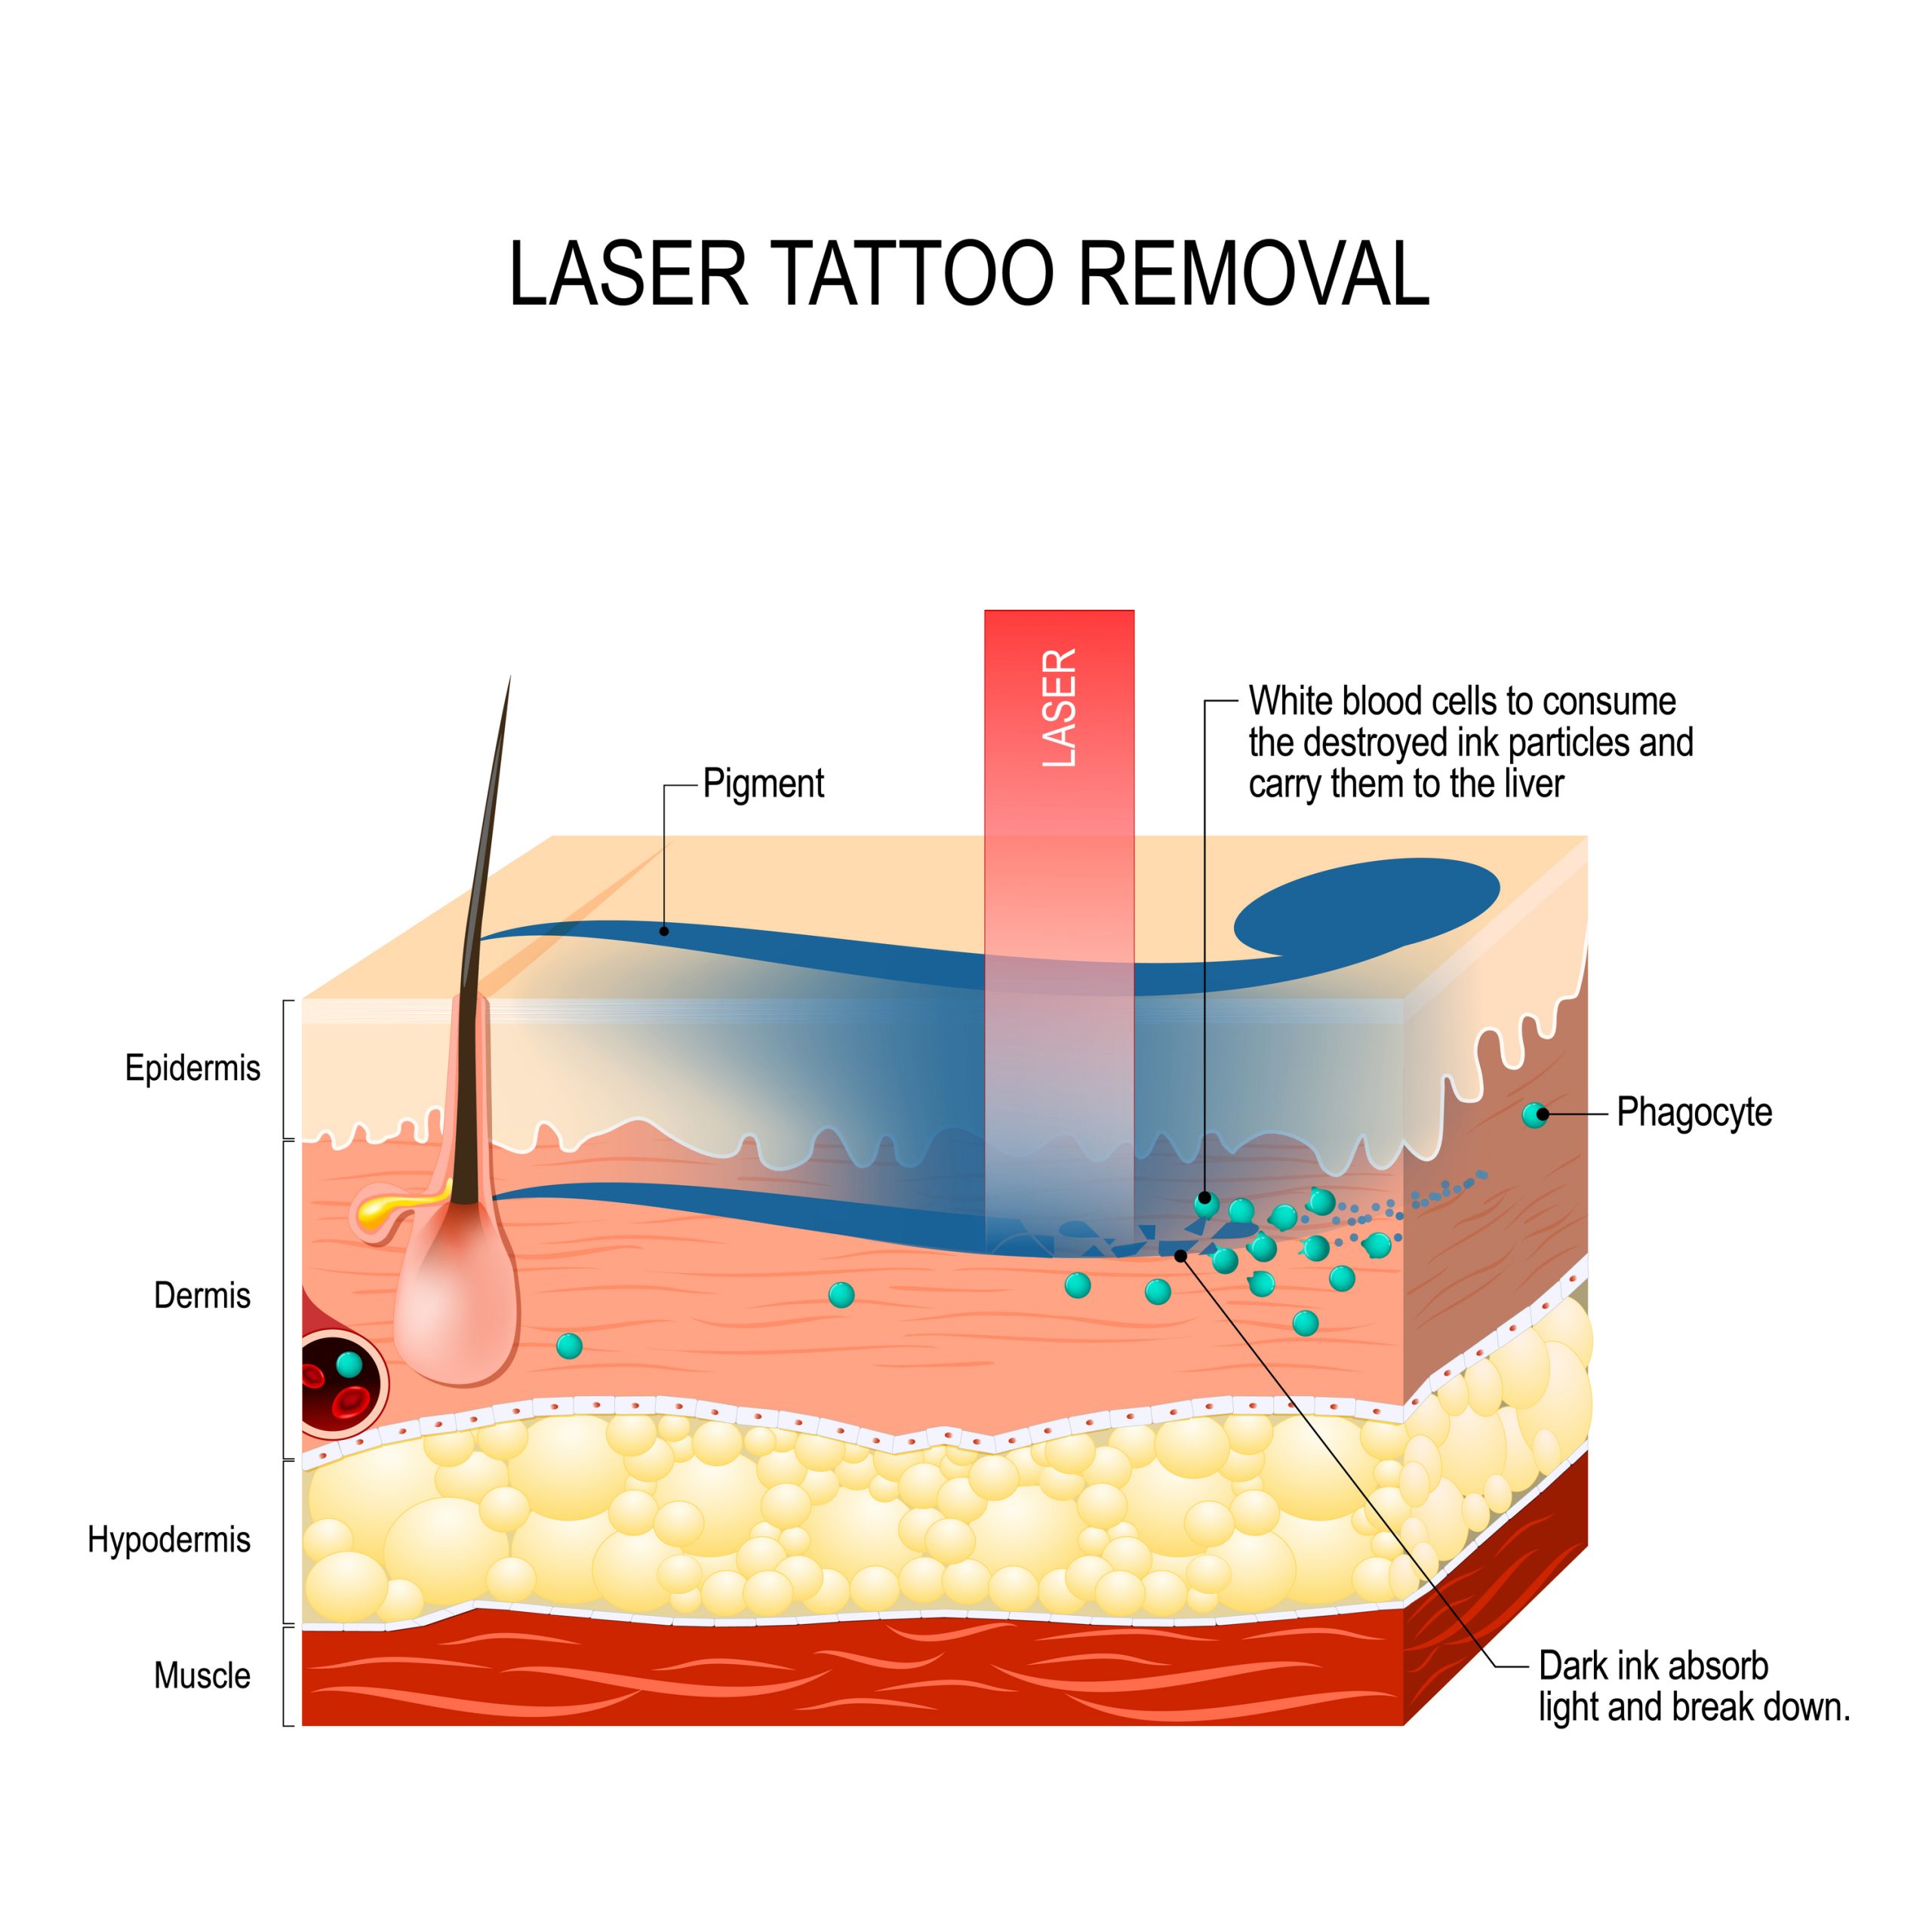 Health Implications Of Tattoo Removal: Is It Safe? | Credihealth